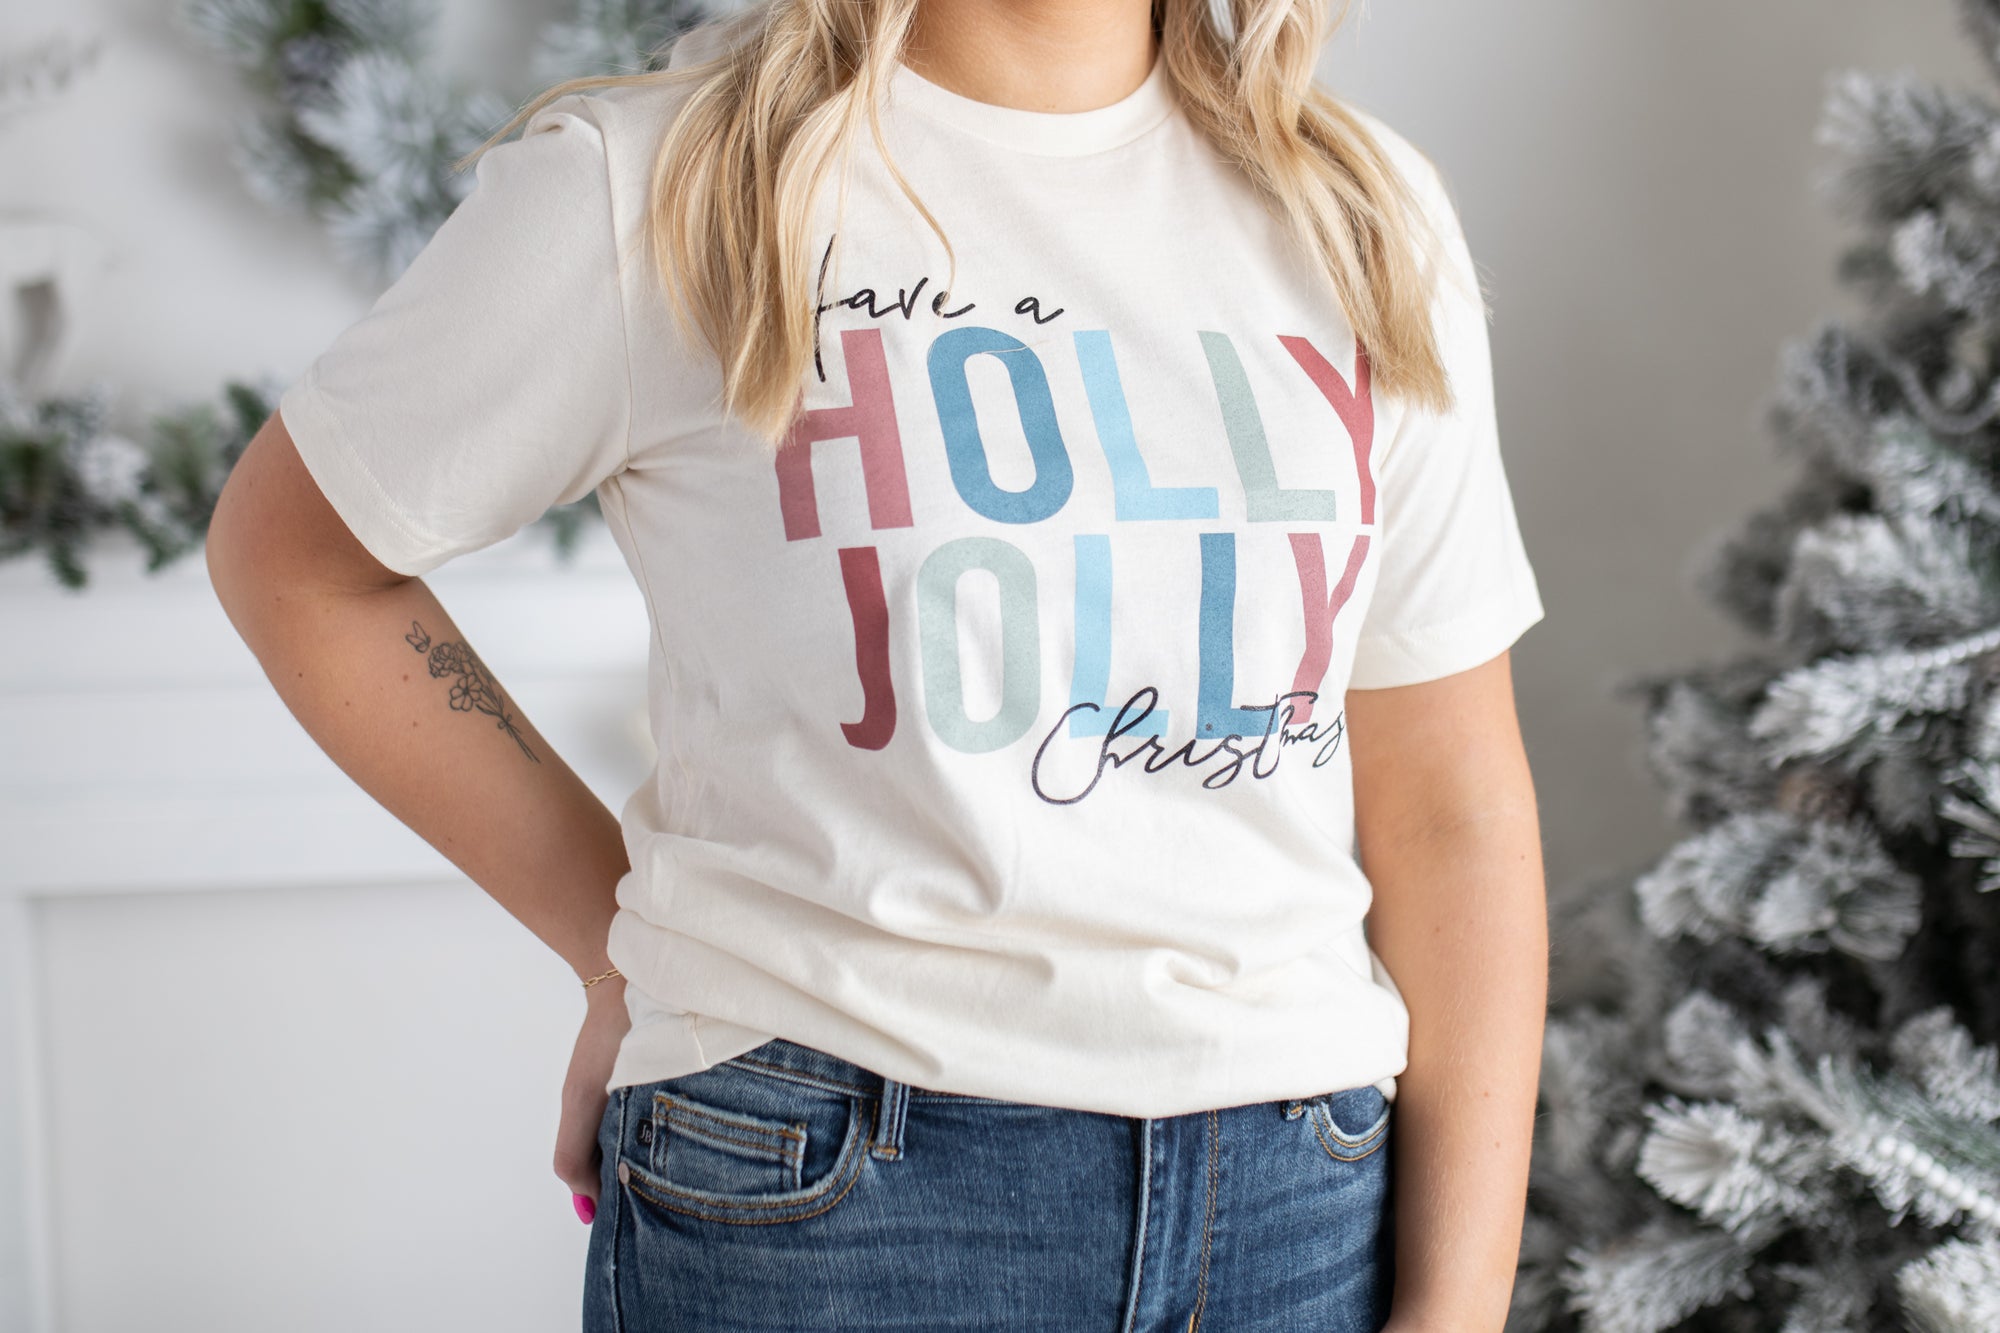 "Holly Jolly Christmas" Graphic Tee